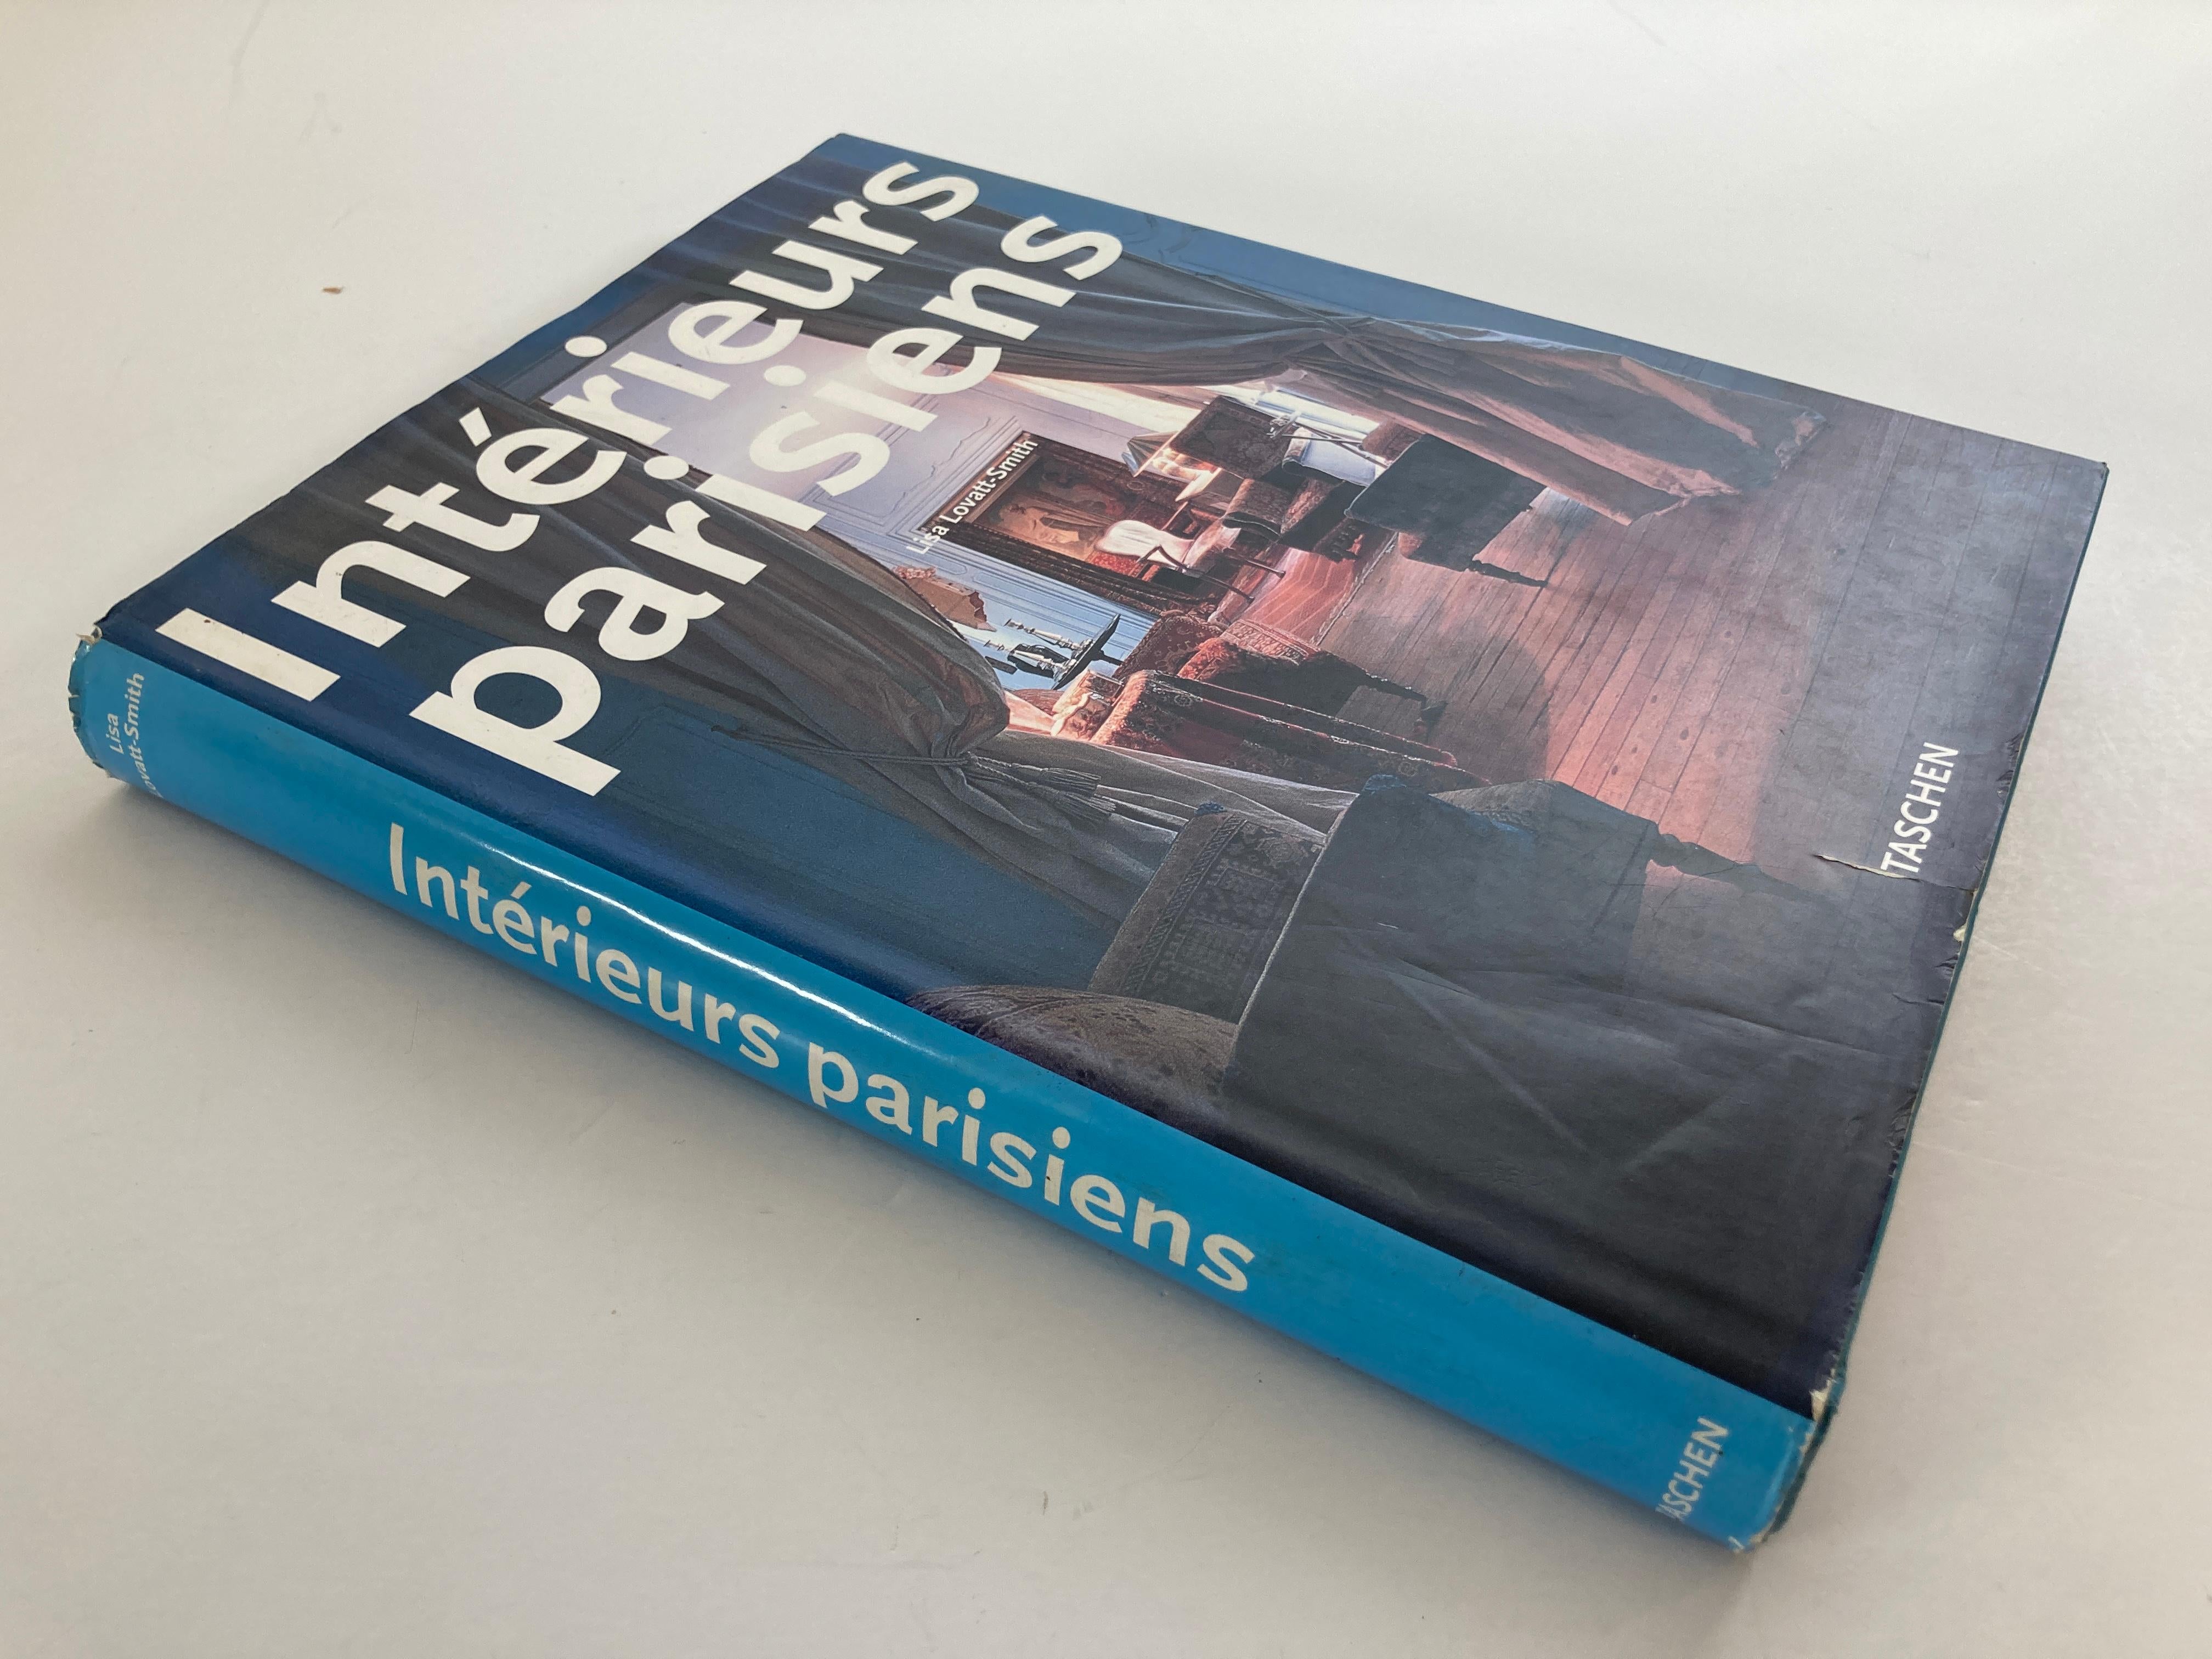 Parisian interiors Hardcover - January 1, 1996
Interieurs parisiens by Lisa Lovatt-Smith ; edited by Angelika Muthesius
by lisa-lovatt-smith (Author)
Publisher: Taschen (January 1, 1996)
Language:: German, French, English
Koln : Taschen, 1994.